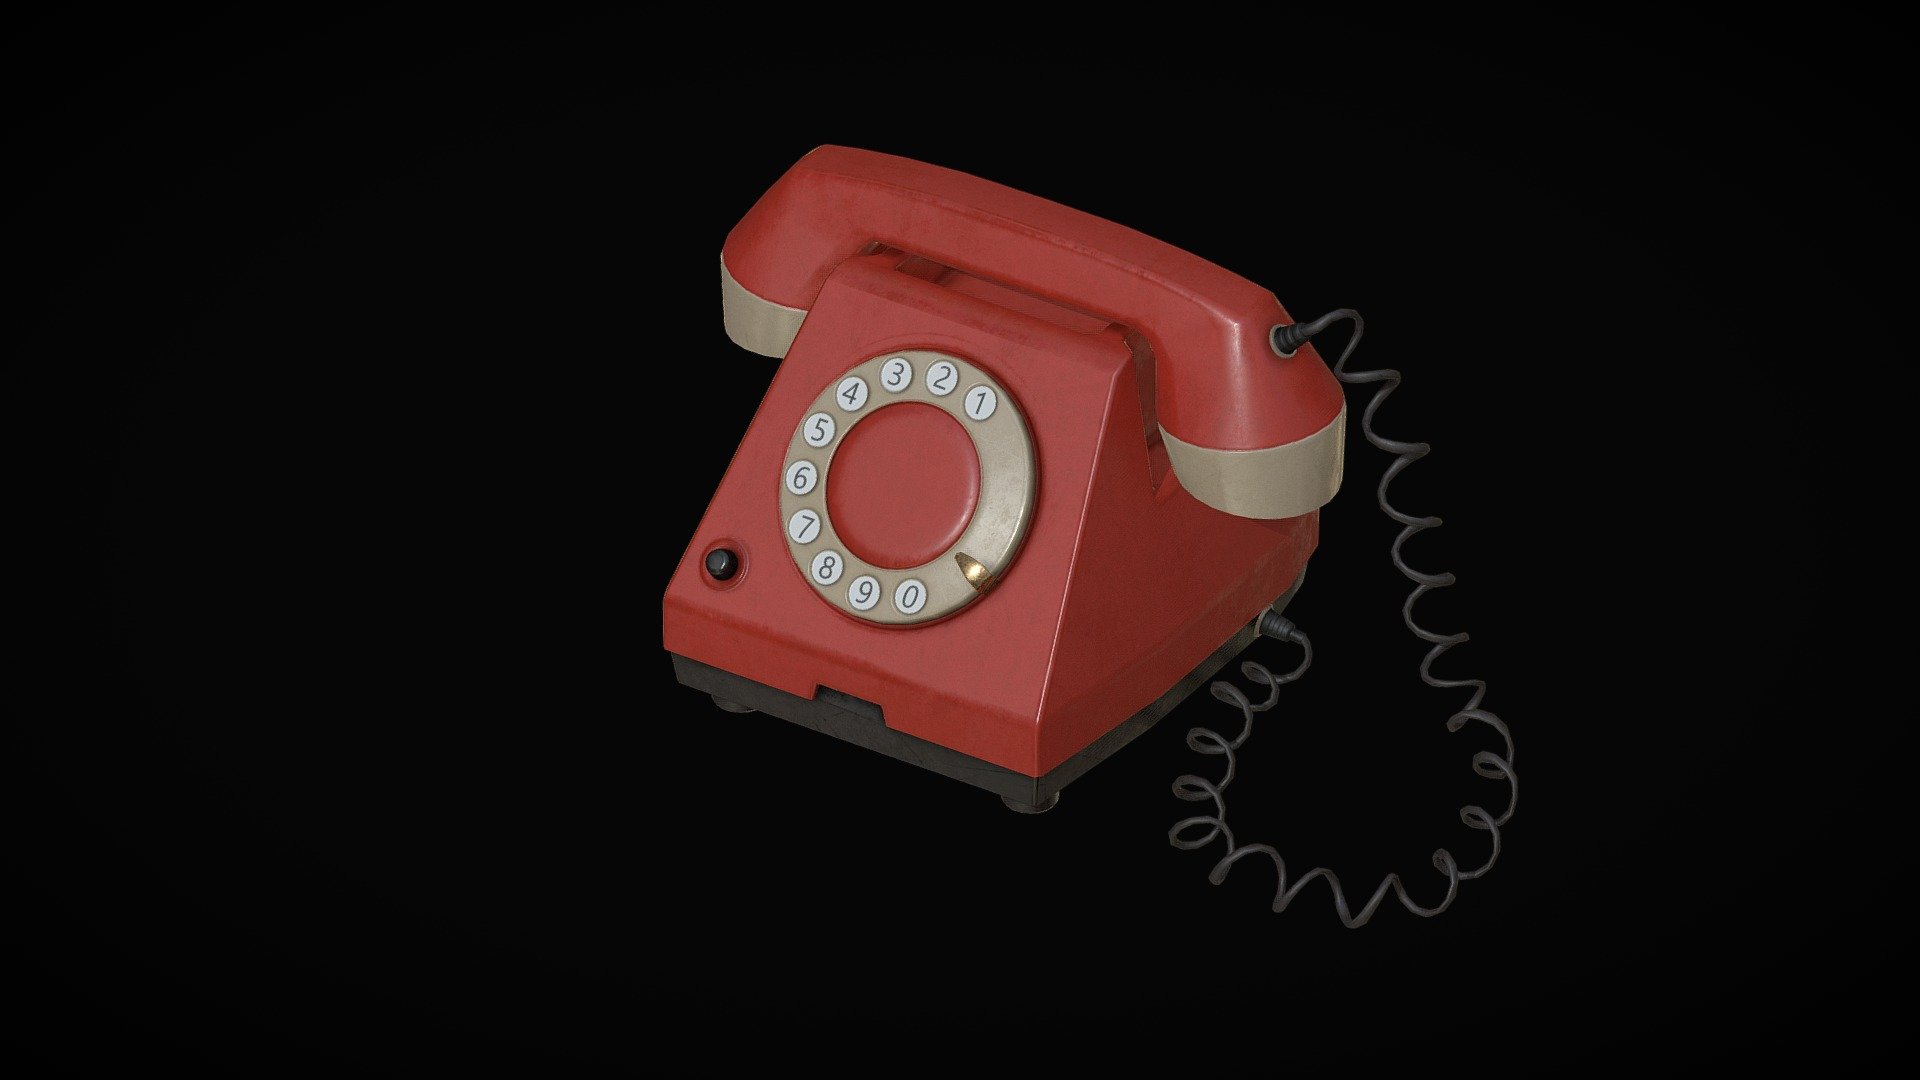 Old USSR Phone
Free VR / AR / Low poly 3D Model - Old Phone - 3D model by Evgenii Sobolev (@ESobolev) 3d model